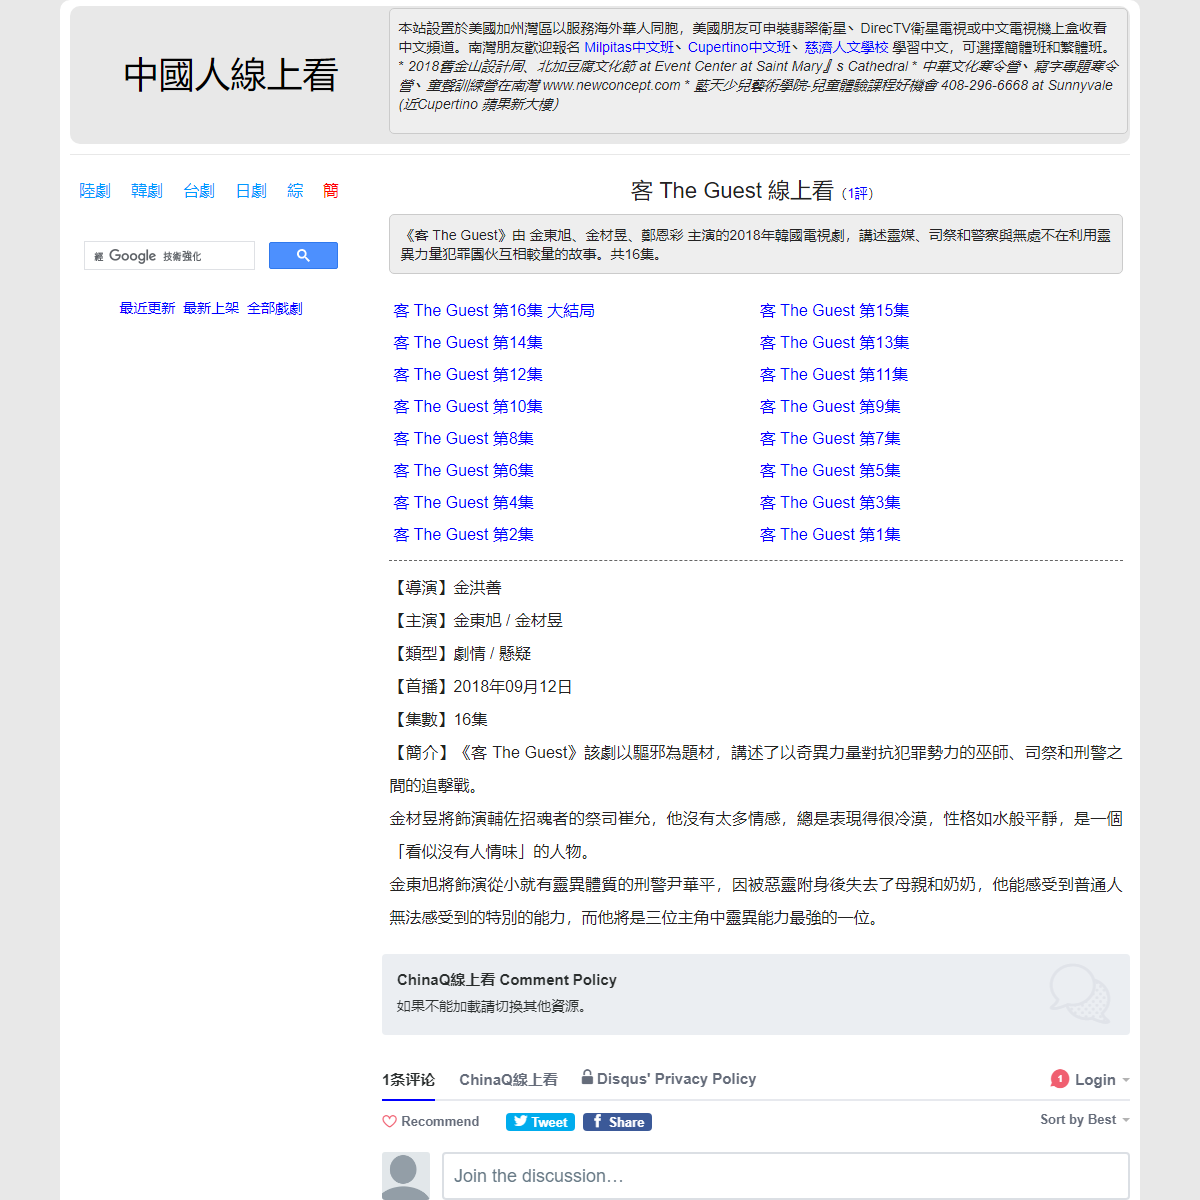 A complete backup of https://chinaq.tv/kr180912/